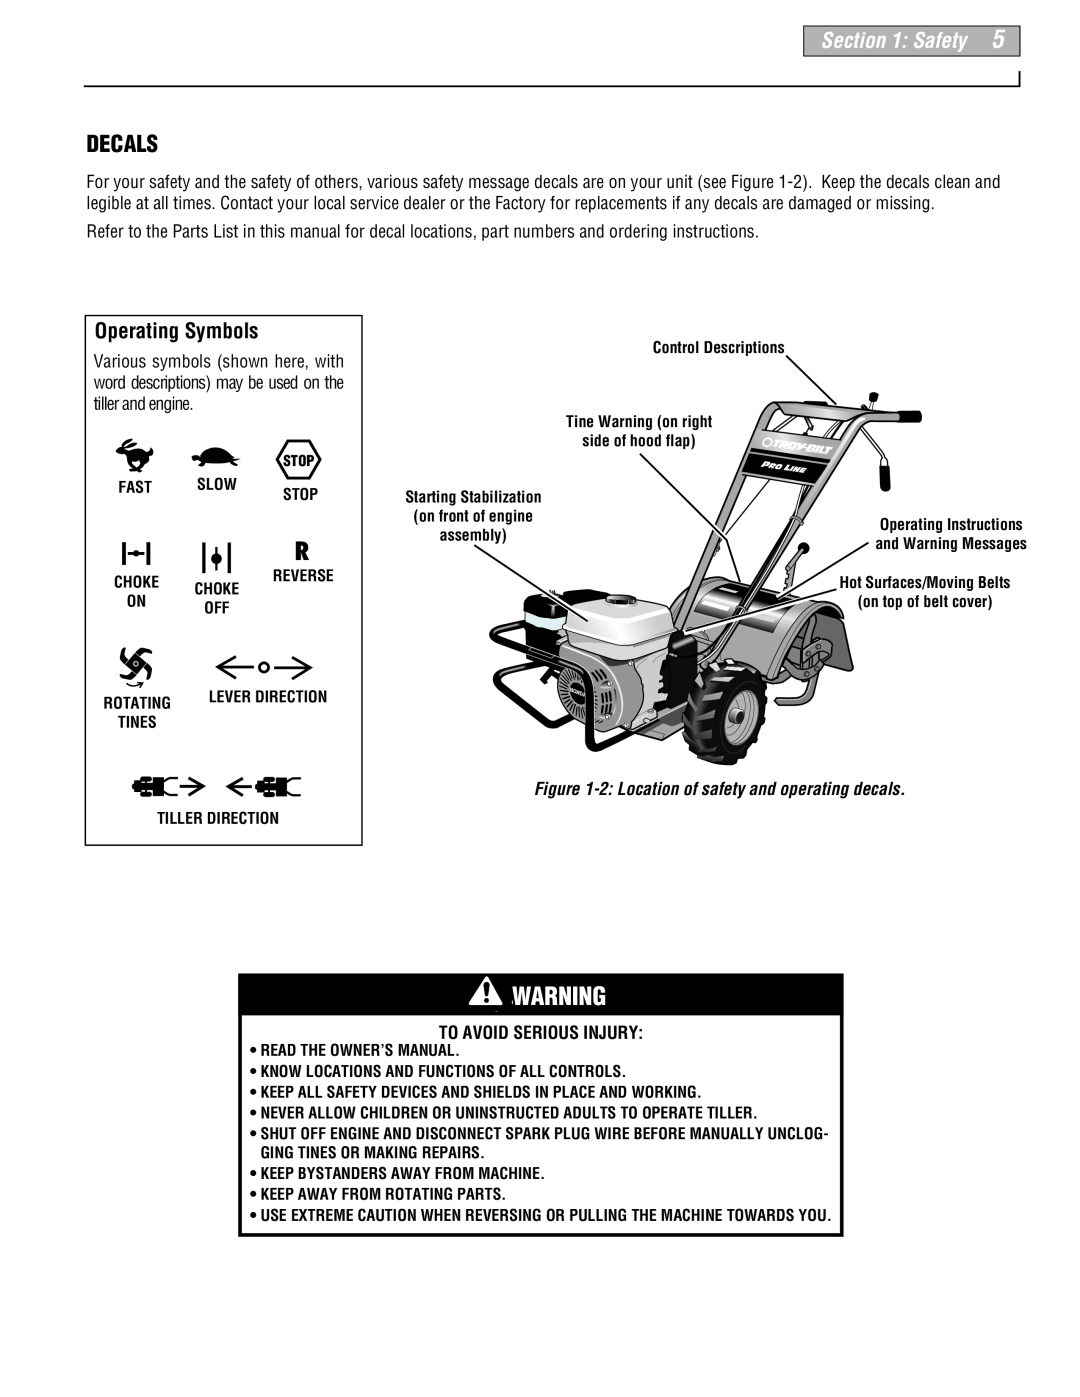 Troy-Bilt 665B manual Decals, Safety, Operating Symbols, To Avoid Serious Injury 